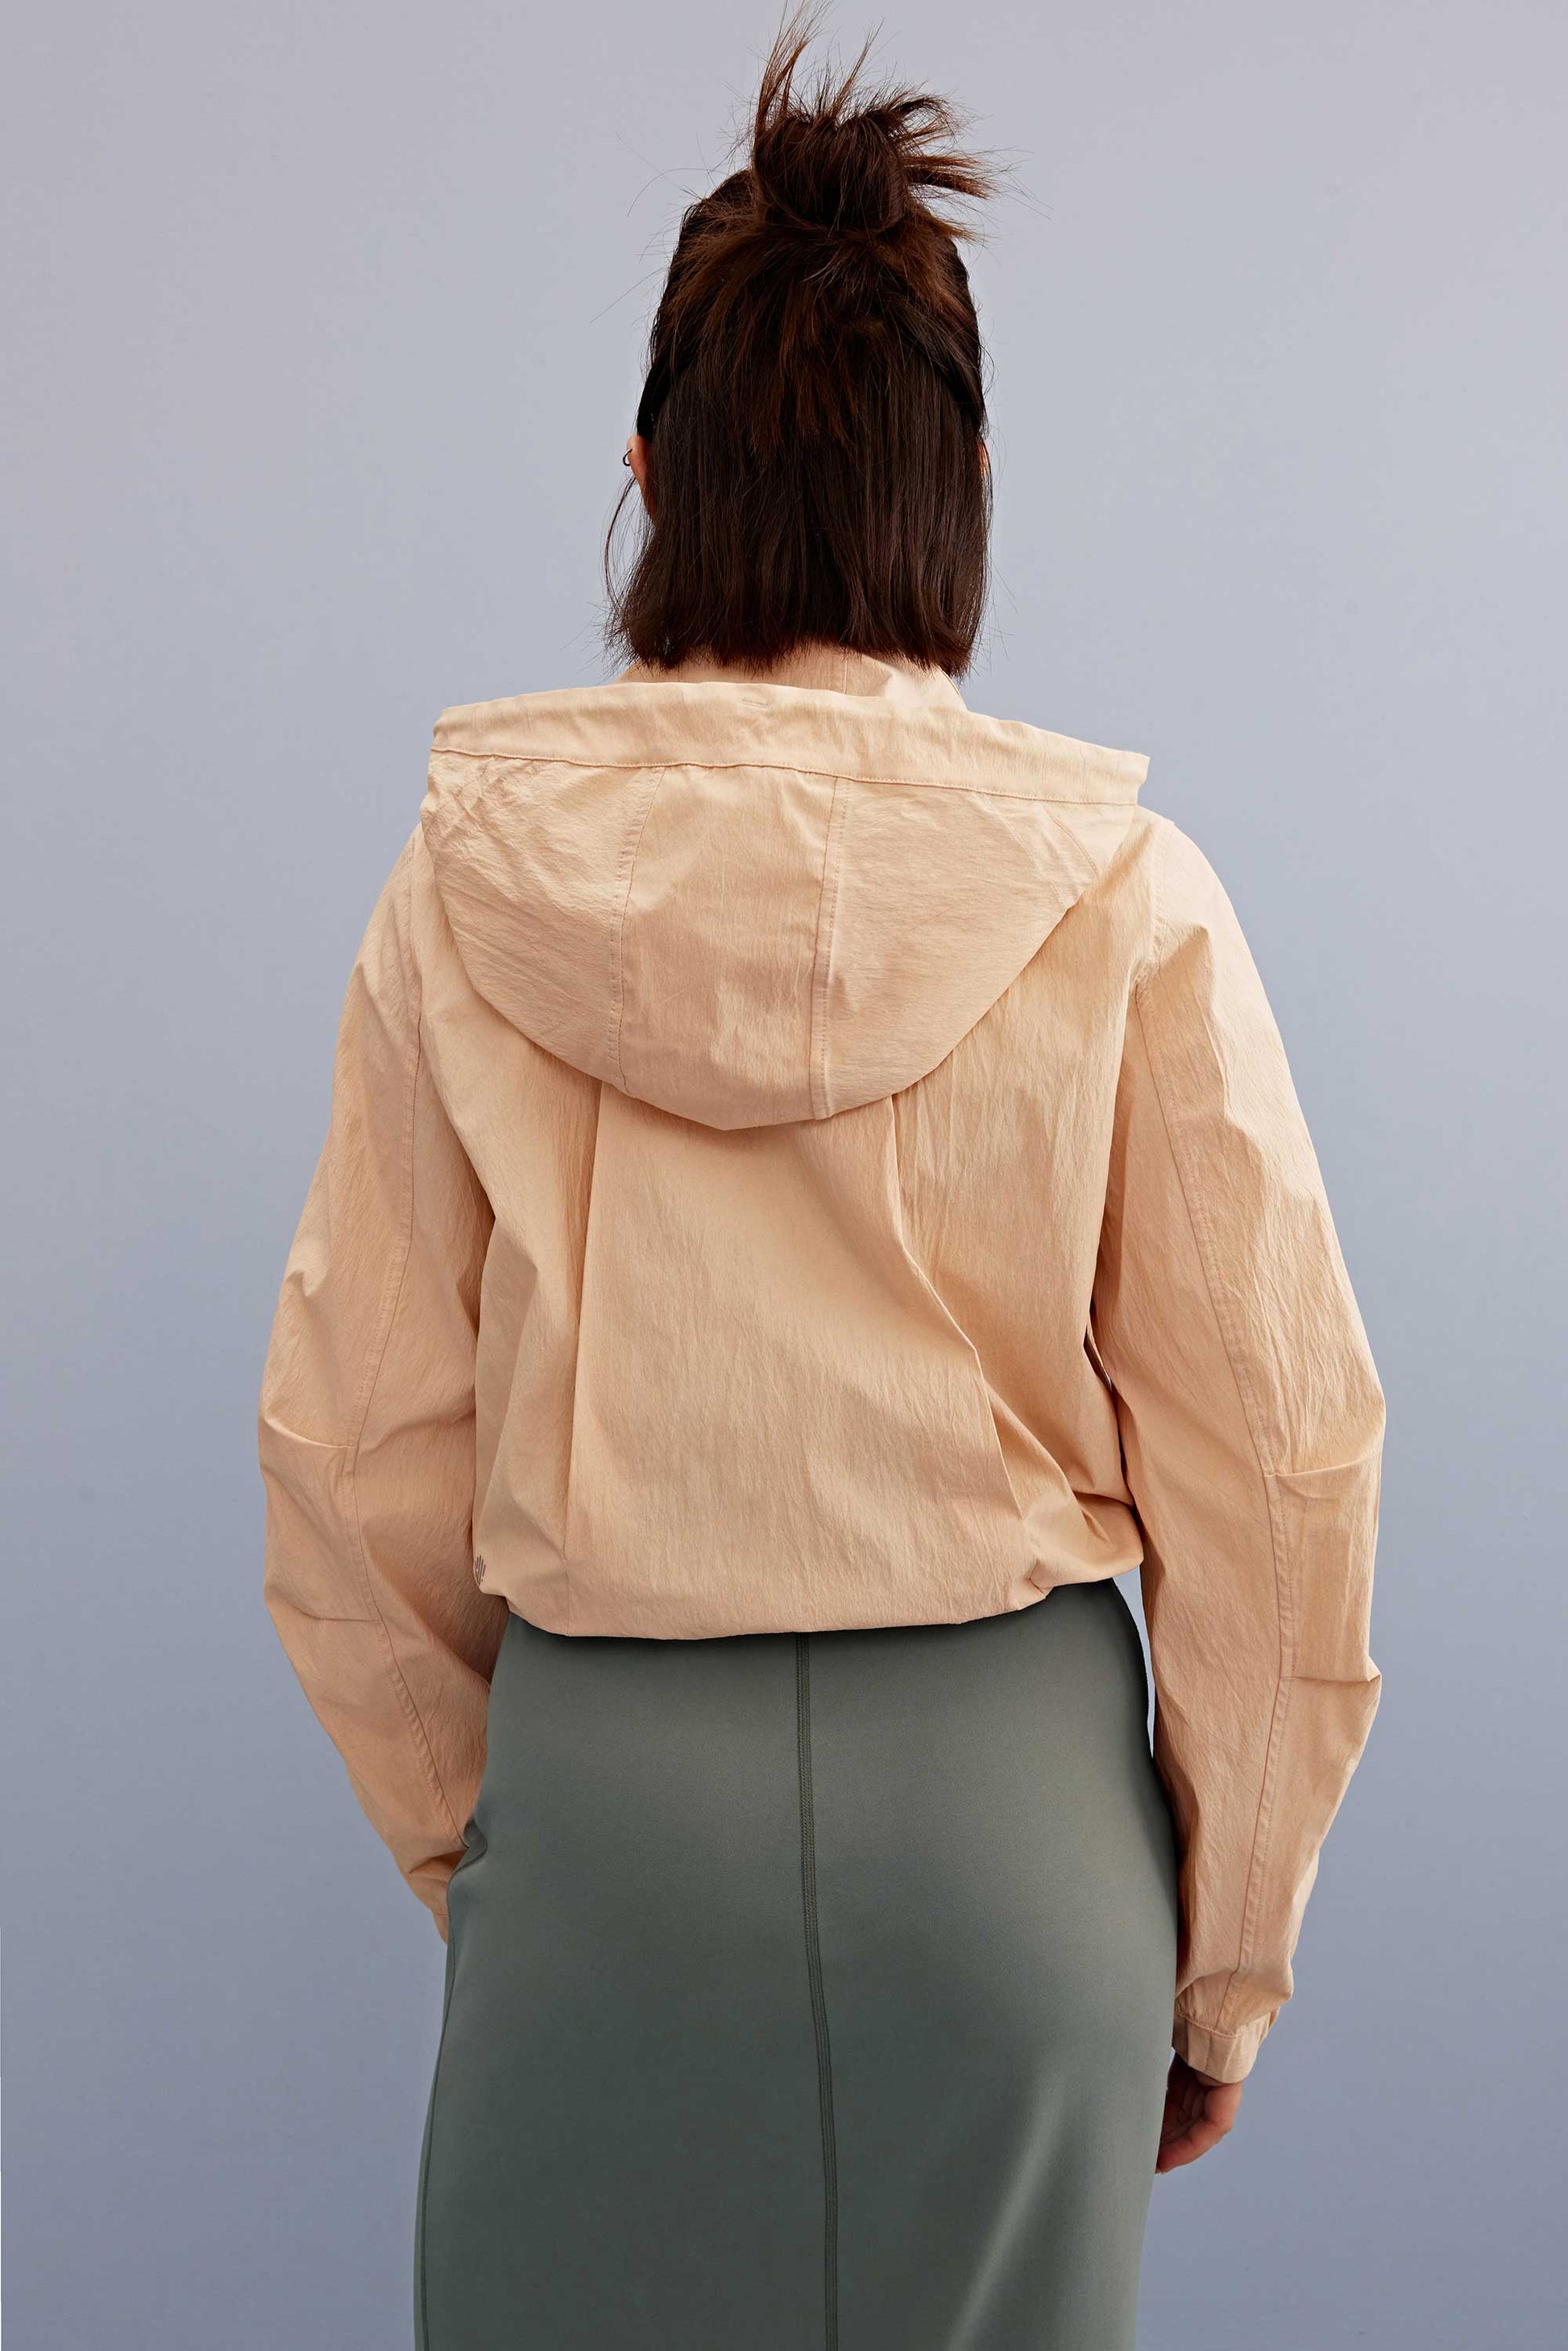 back of a woman wearing a warm yellow jacket and green skirt